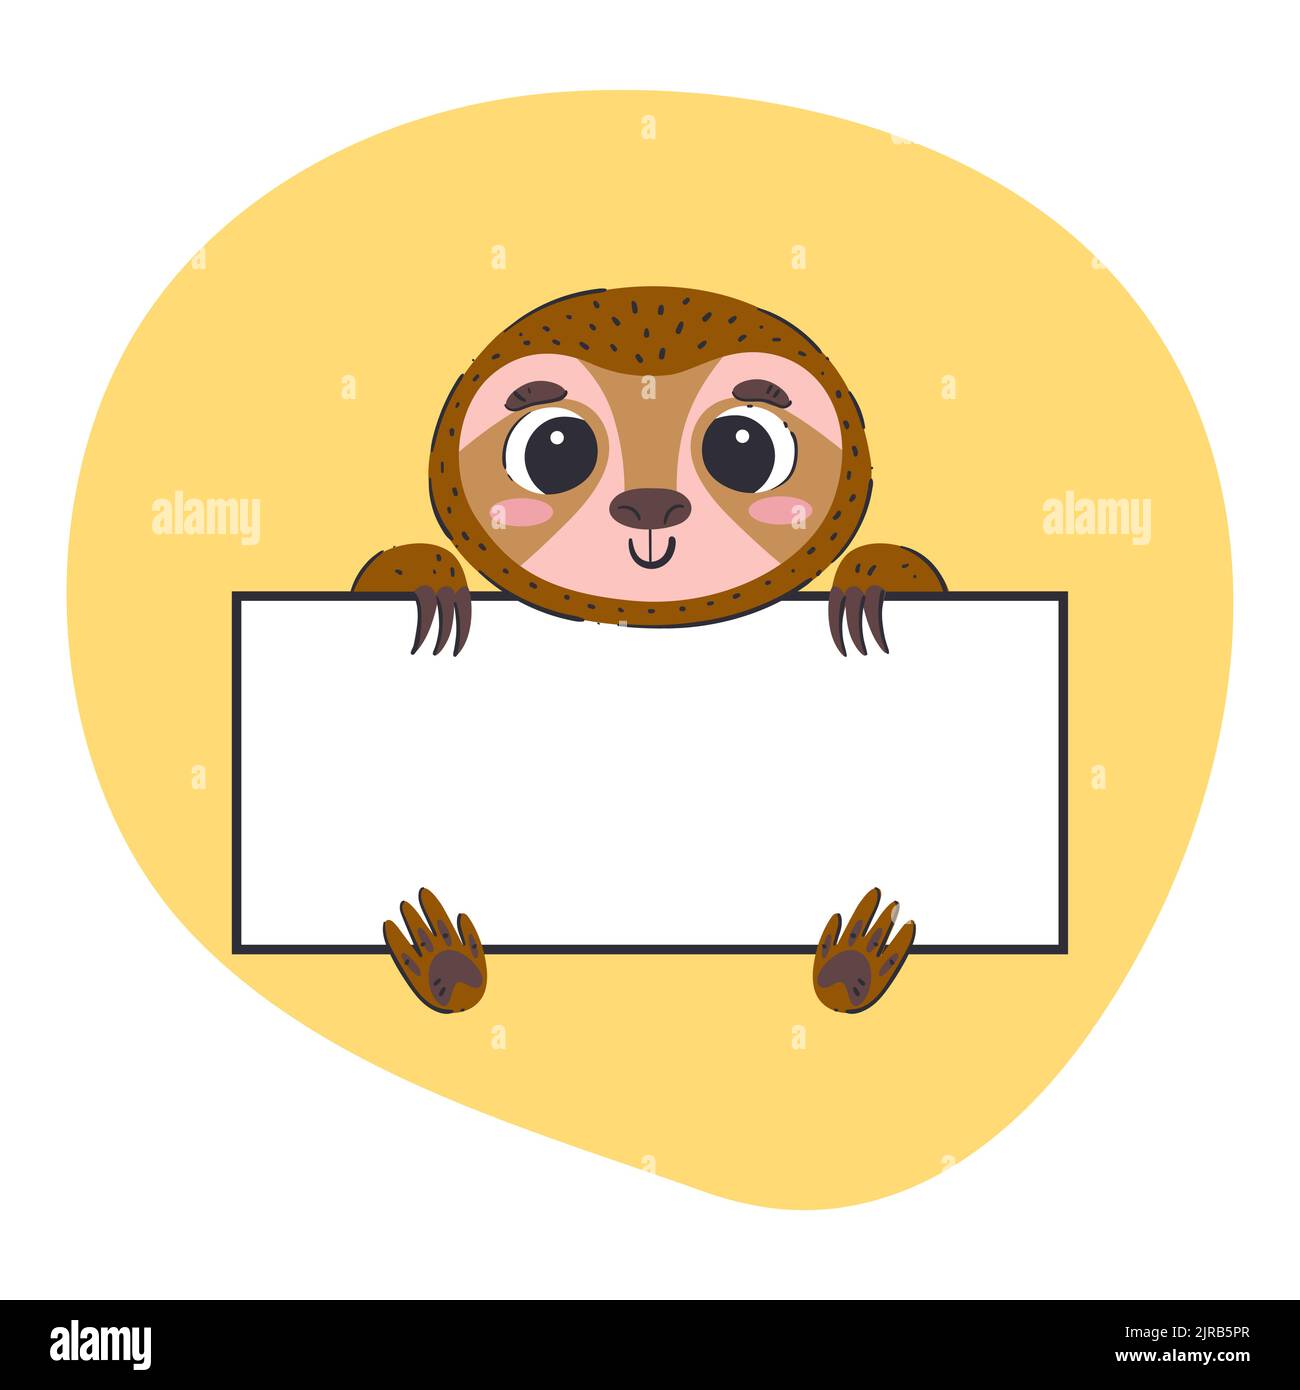 Sloth holding a white banner. Cute hand-drawn vector illustration with yellow background. Editable card template. Stock Vector